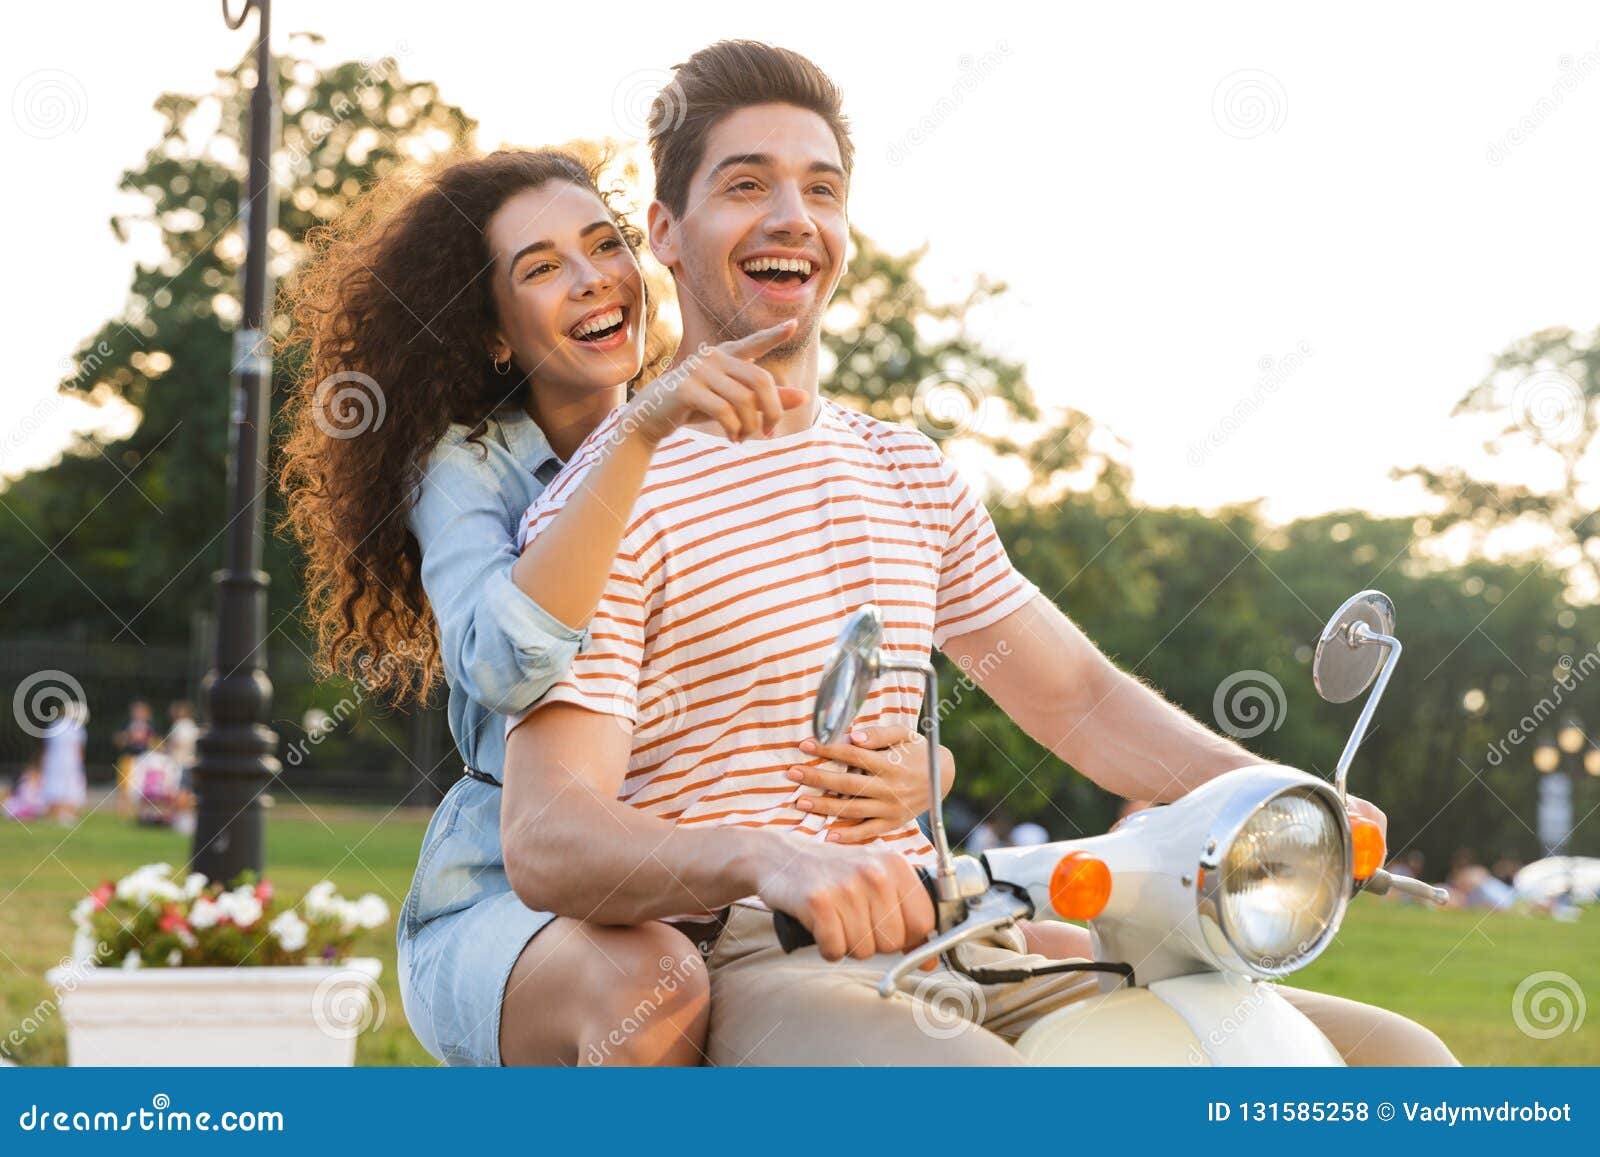 Portrait of Man and Woman Riding on Motorbike Together through City